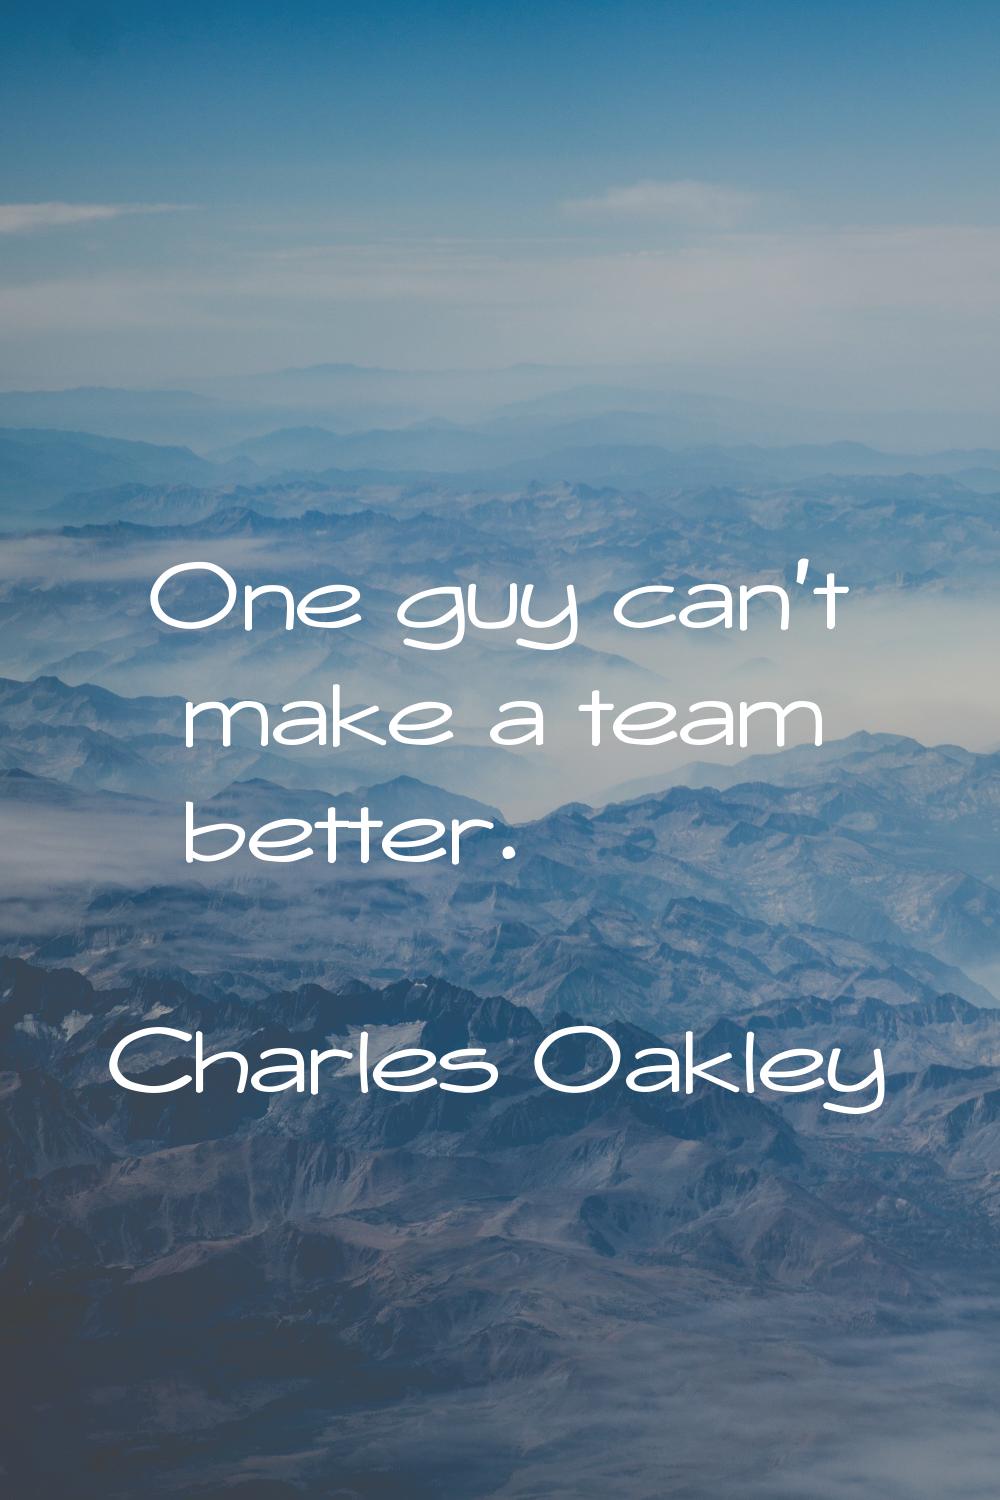 One guy can't make a team better.